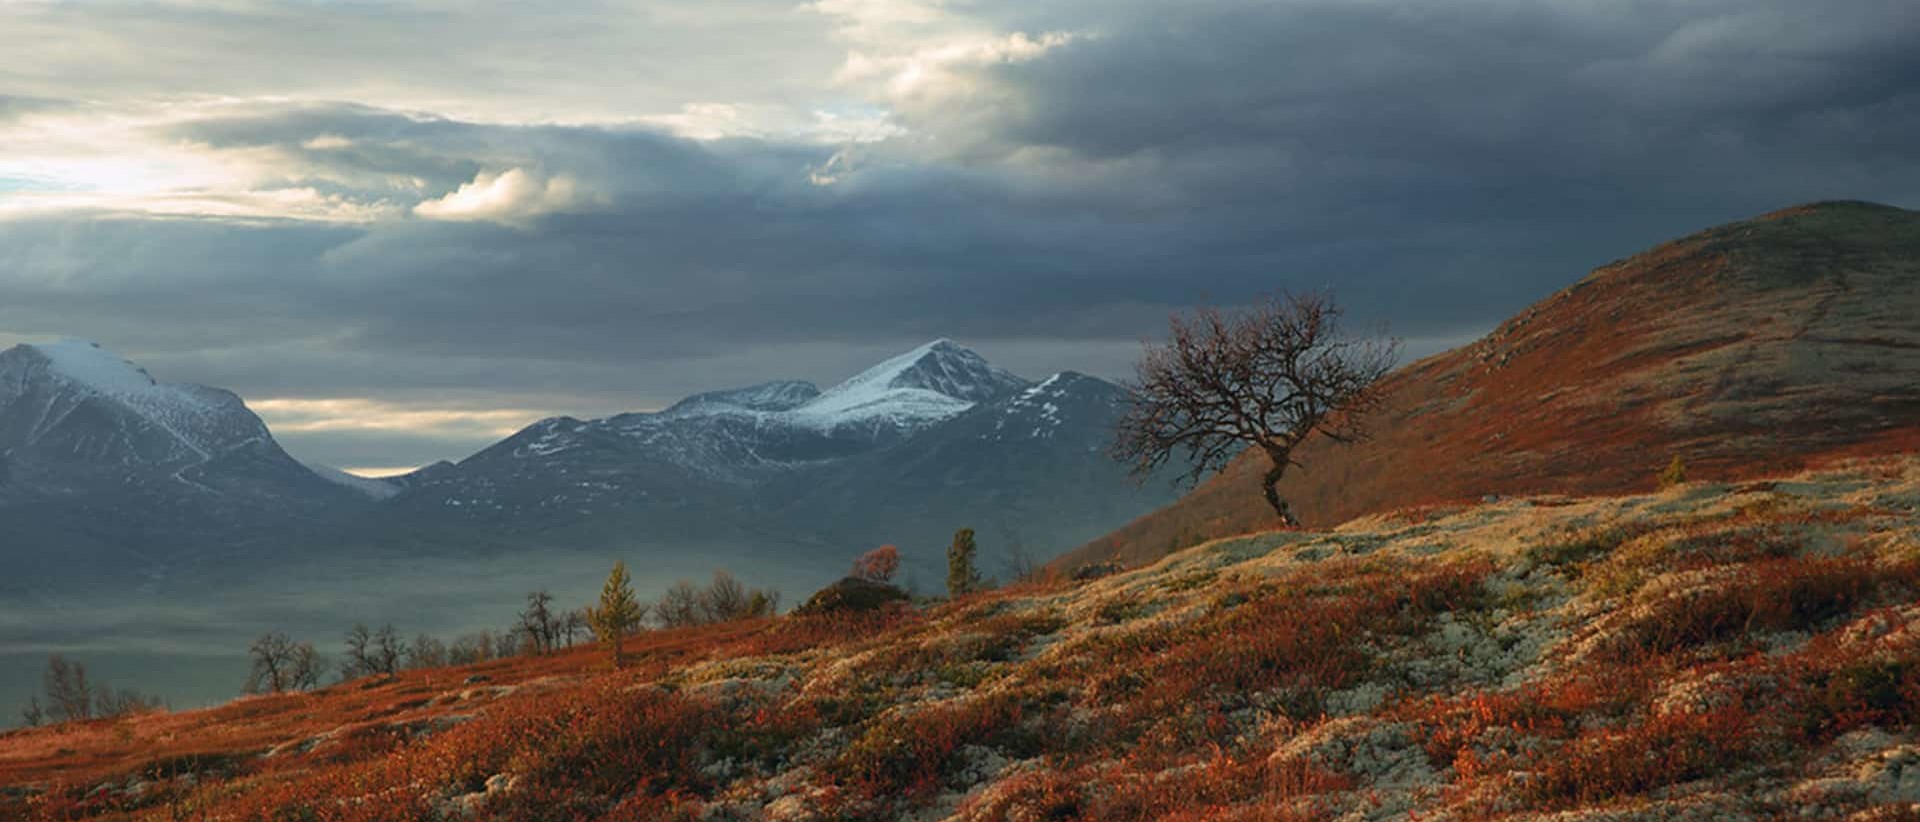 A single tree on a mountain top in autumn colors with snowy mountains in the distance.